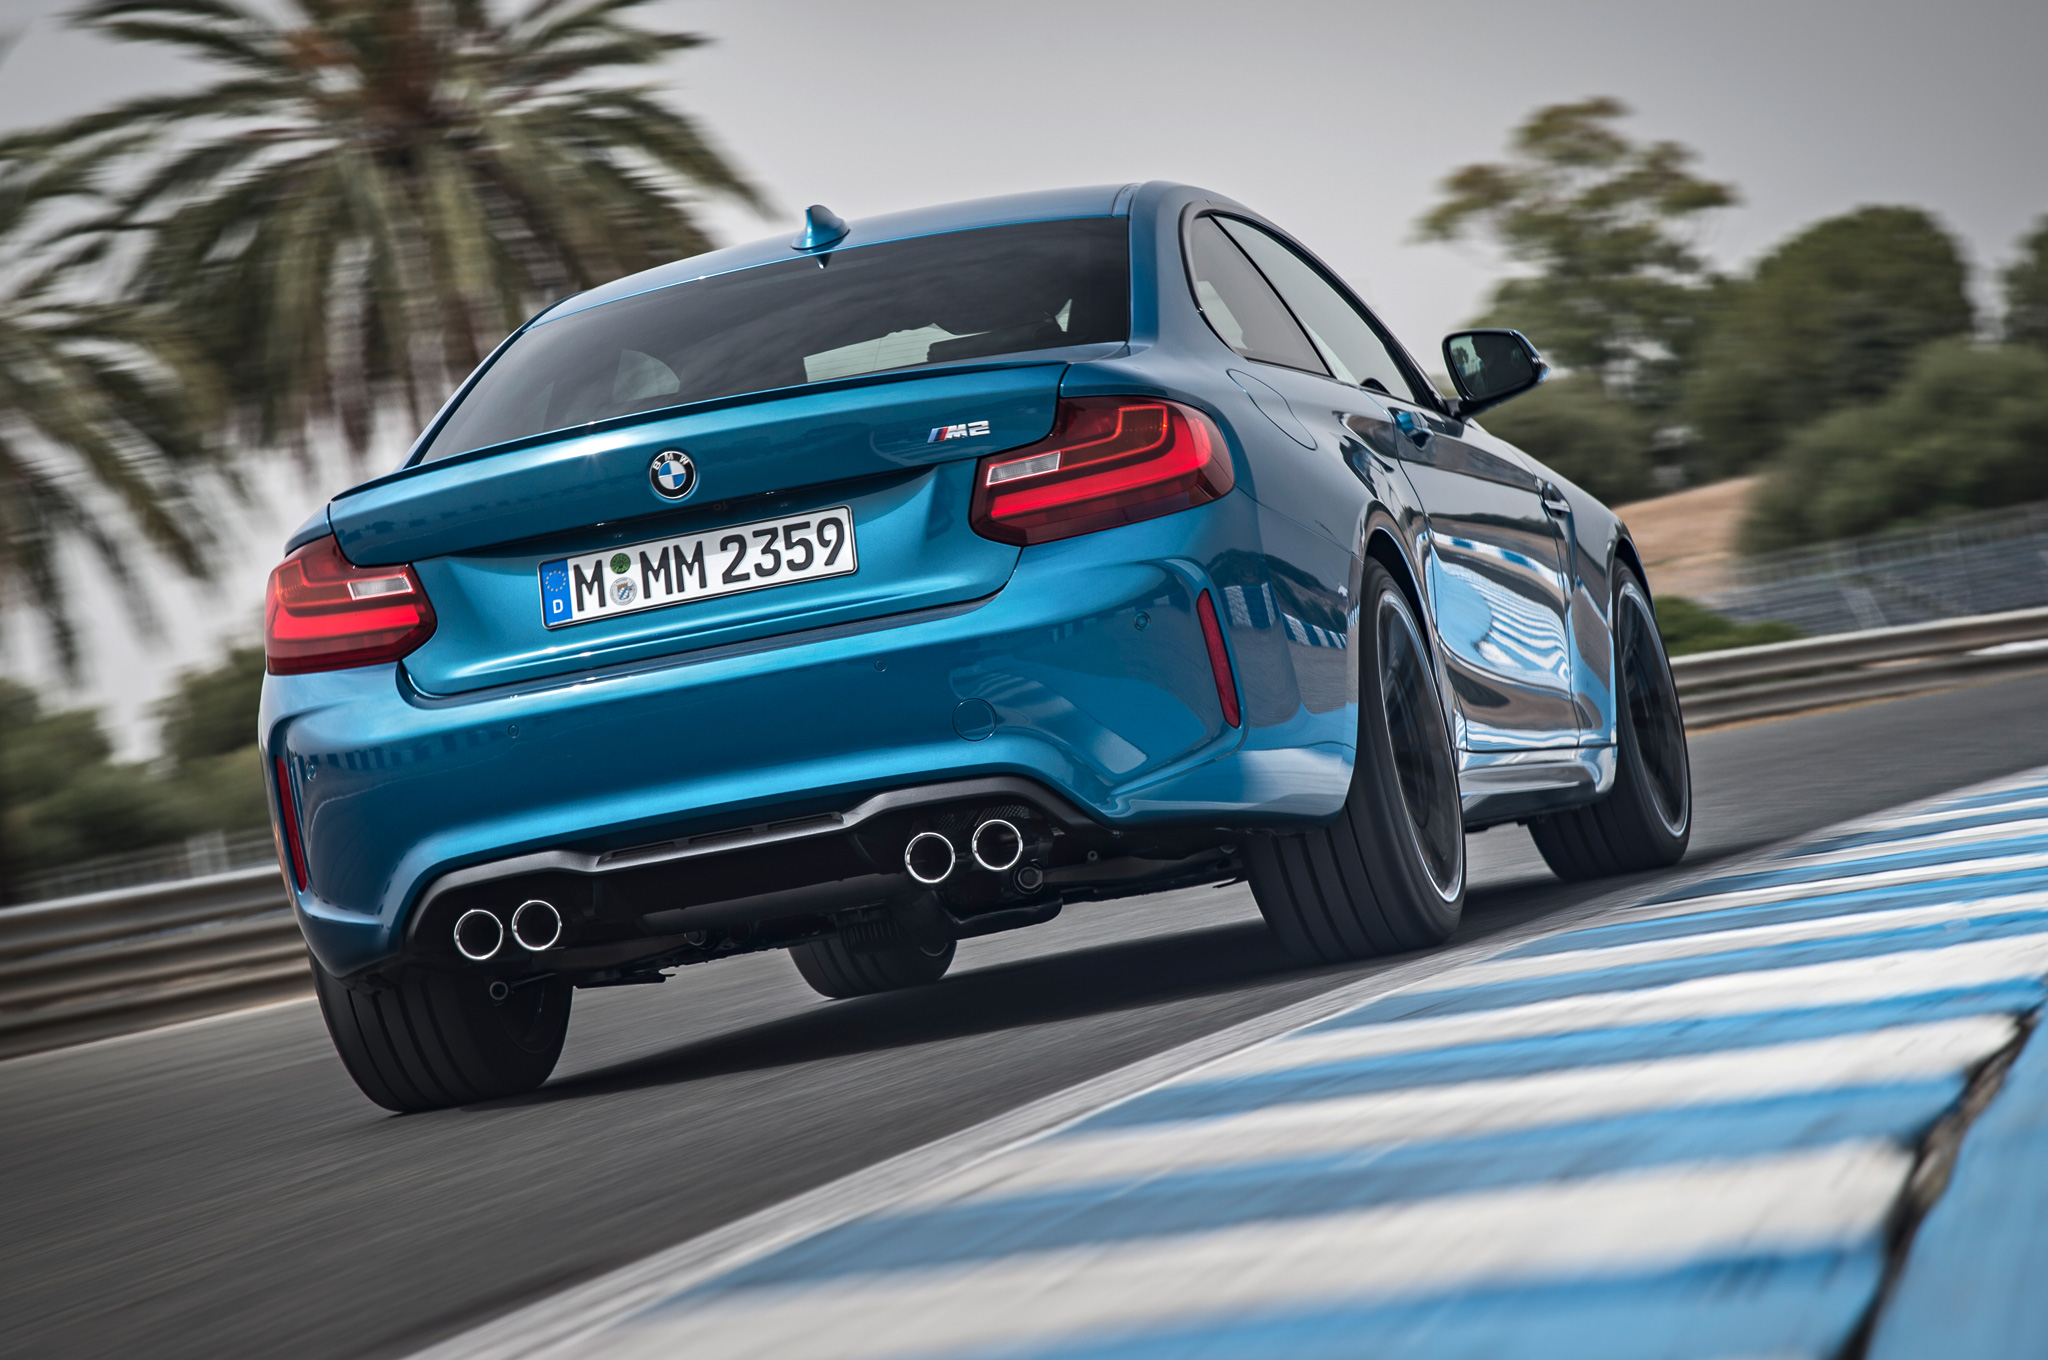 2016 BMW M2 Coupe Best HD Wallpapers   Car Wallpapers HQ